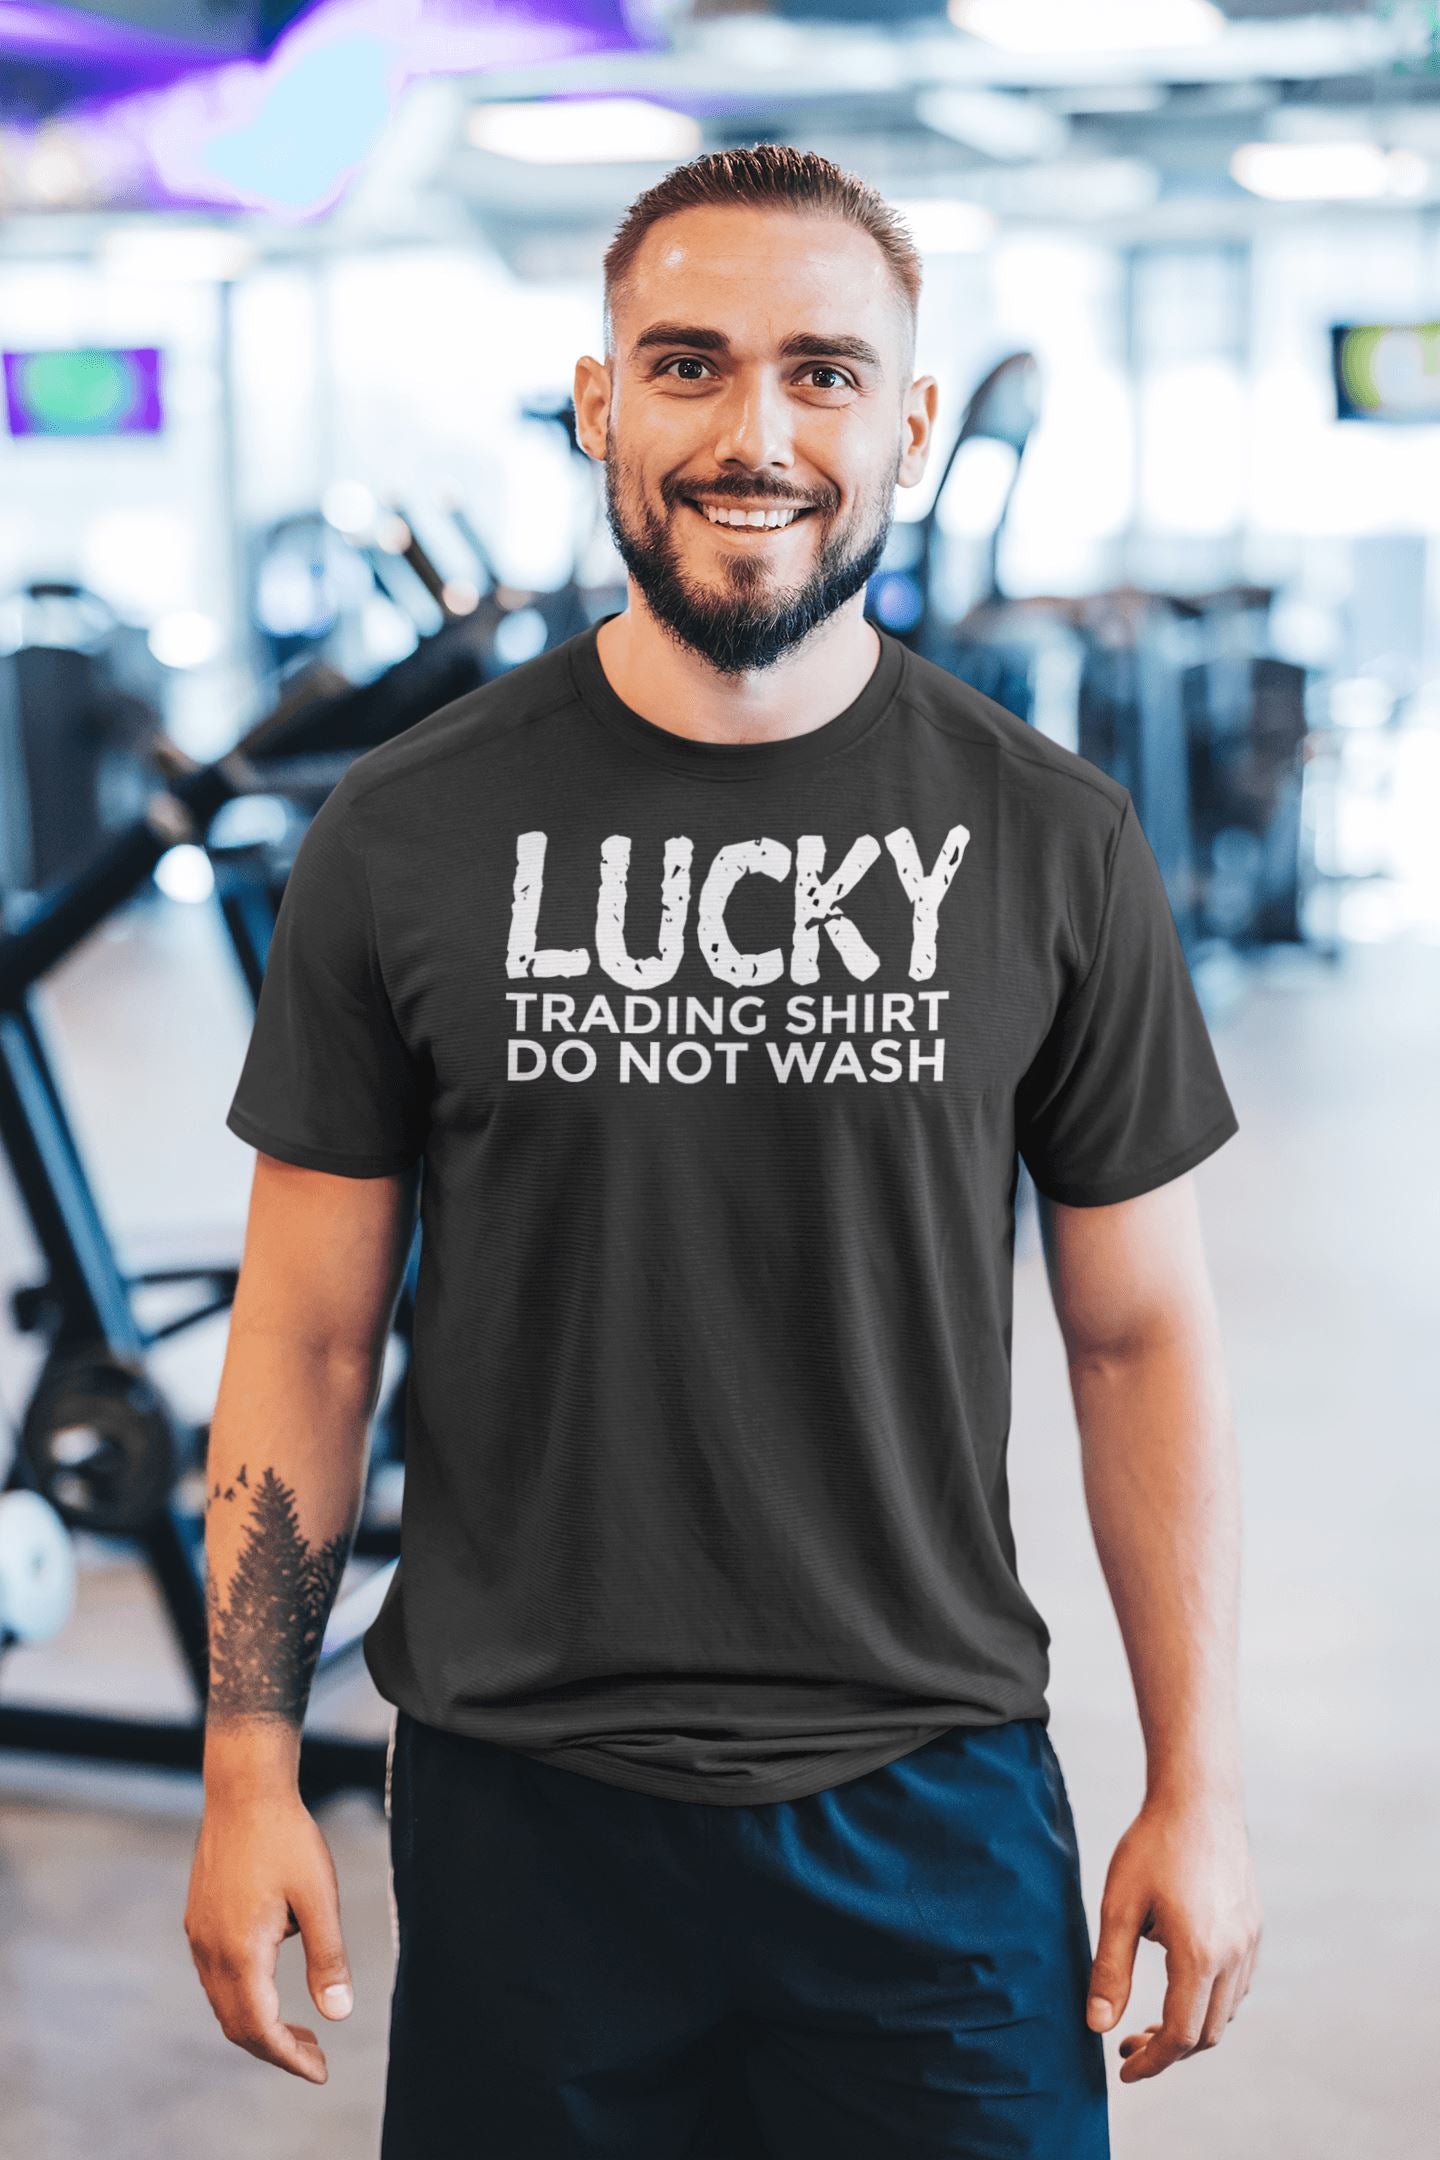 Lucky Trading Shirt Do Not Wash Special T Shirt for Men and Women - Catch My Drift India  black, bse, clothing, general, made in india, market, nifty, nse, sensex, shirt, stock, stock market,